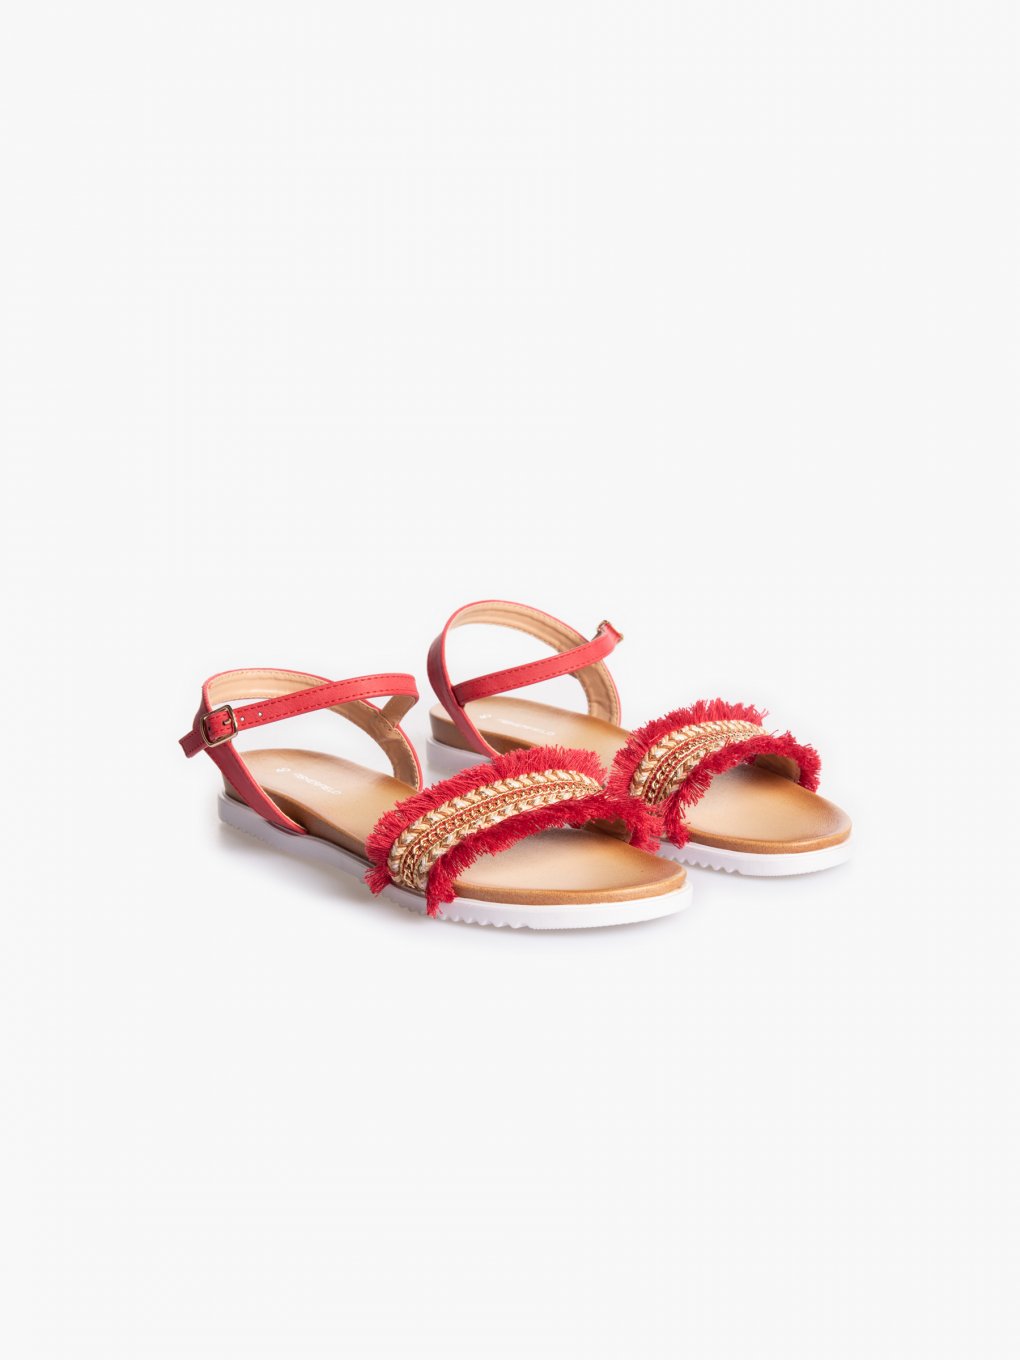 Sandals with tassels